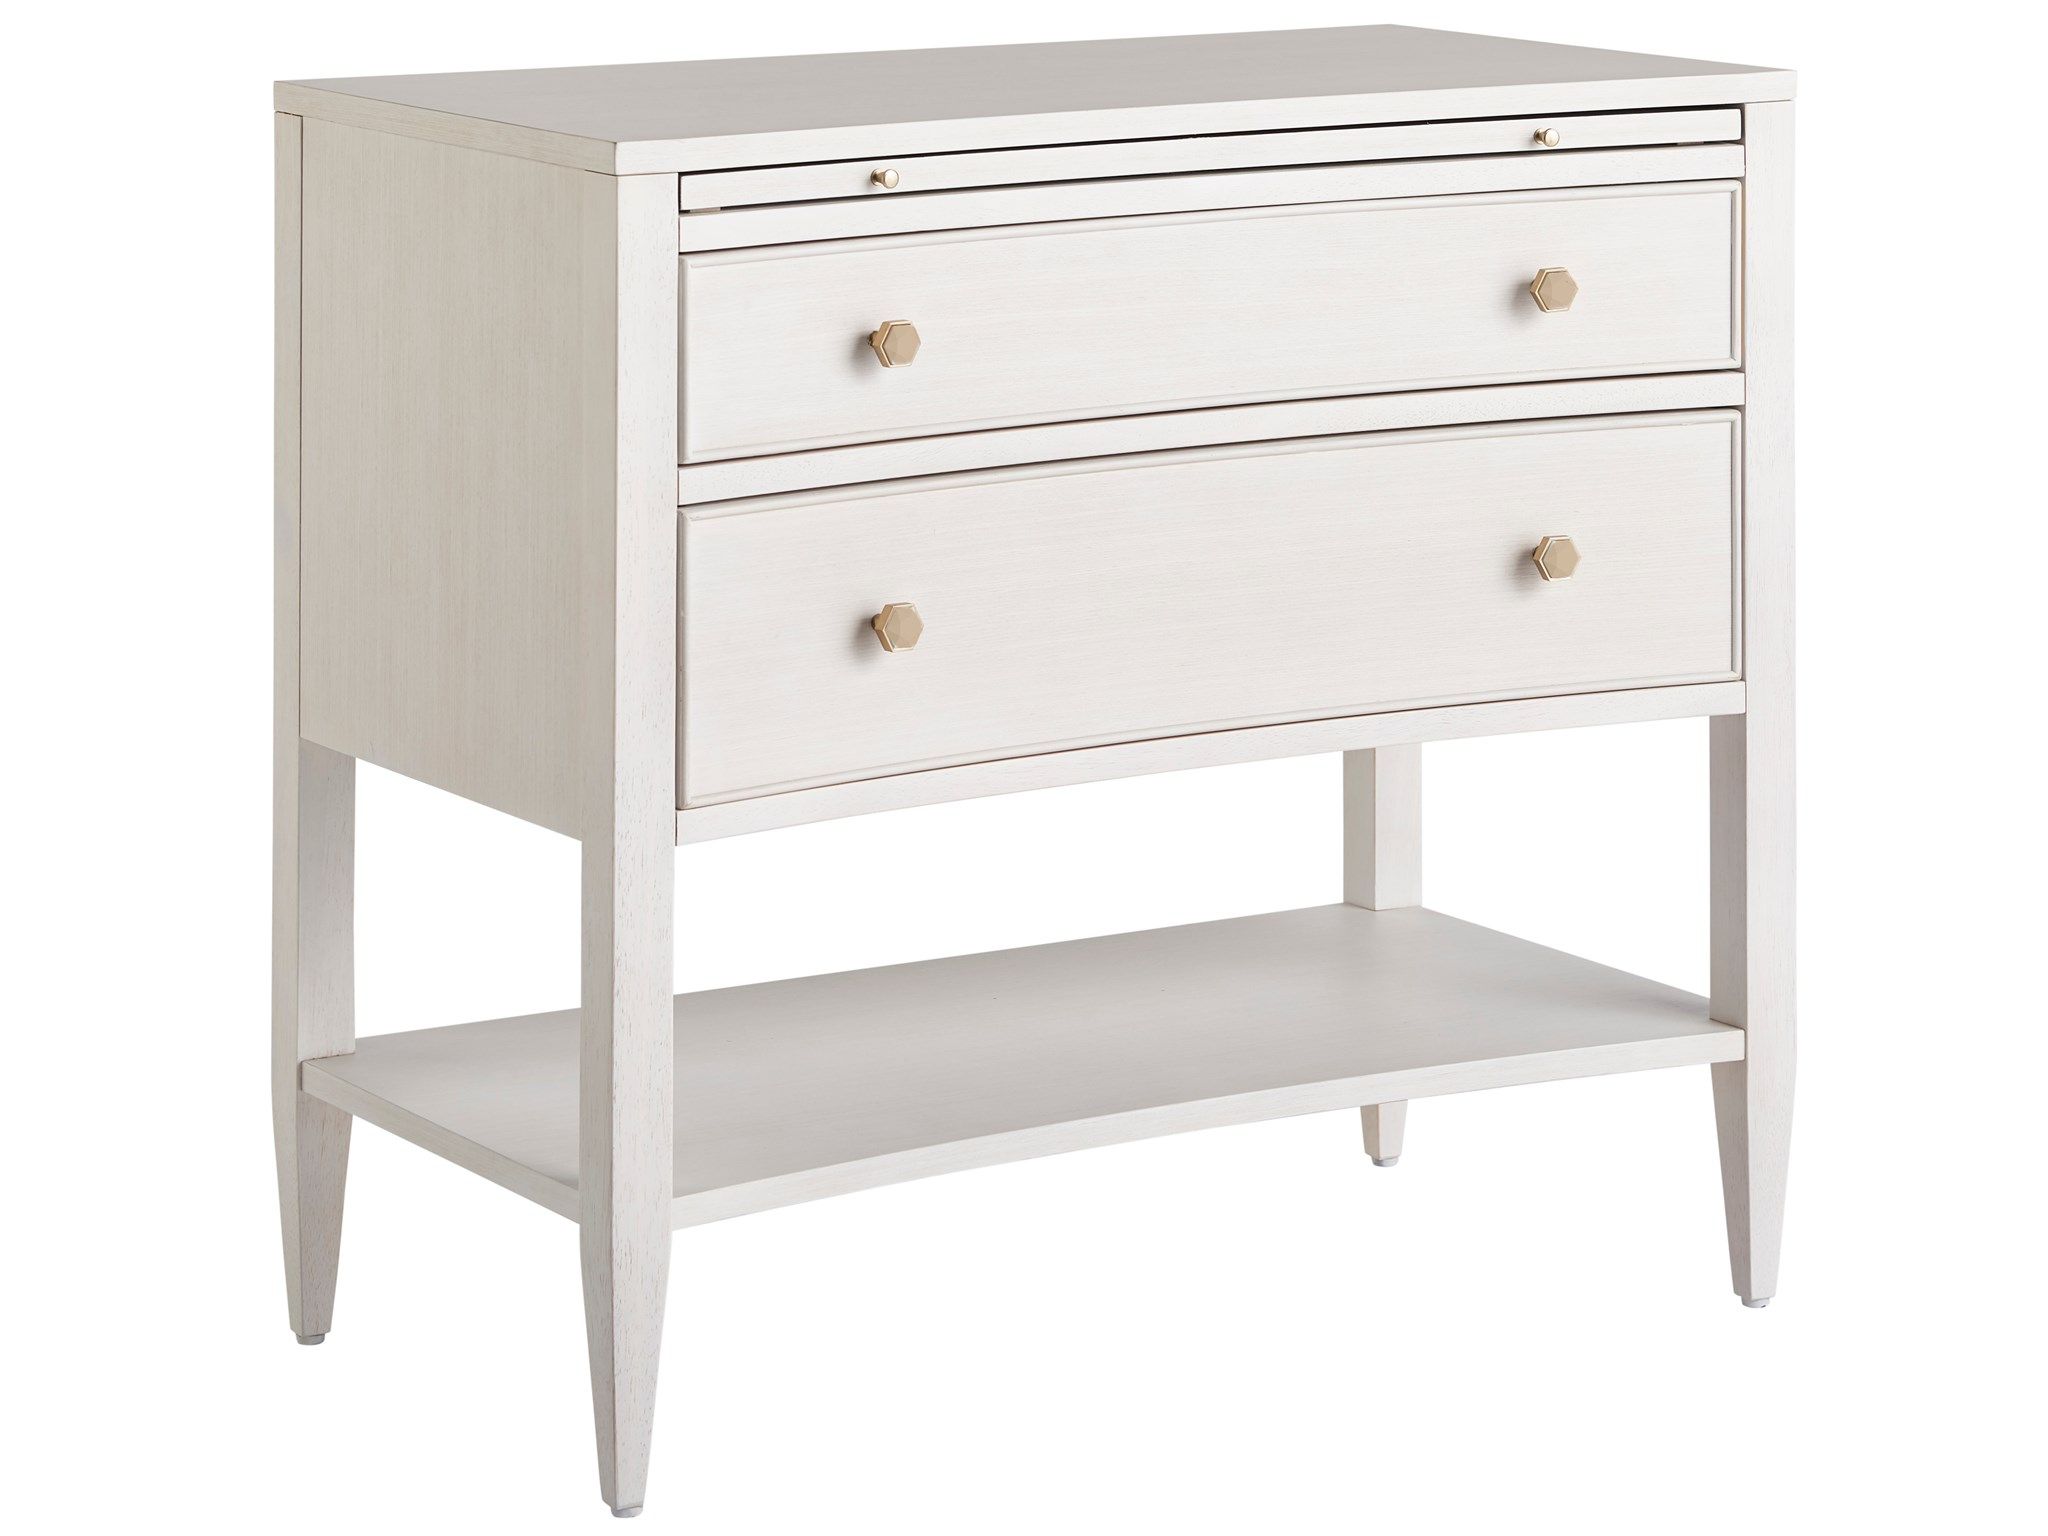 Miranda Kerr Home Chelsea Nightstand | Savvy Furniture Within Rey Coastal Chic Universal Console 2 Drawer Tv Stands (View 11 of 15)